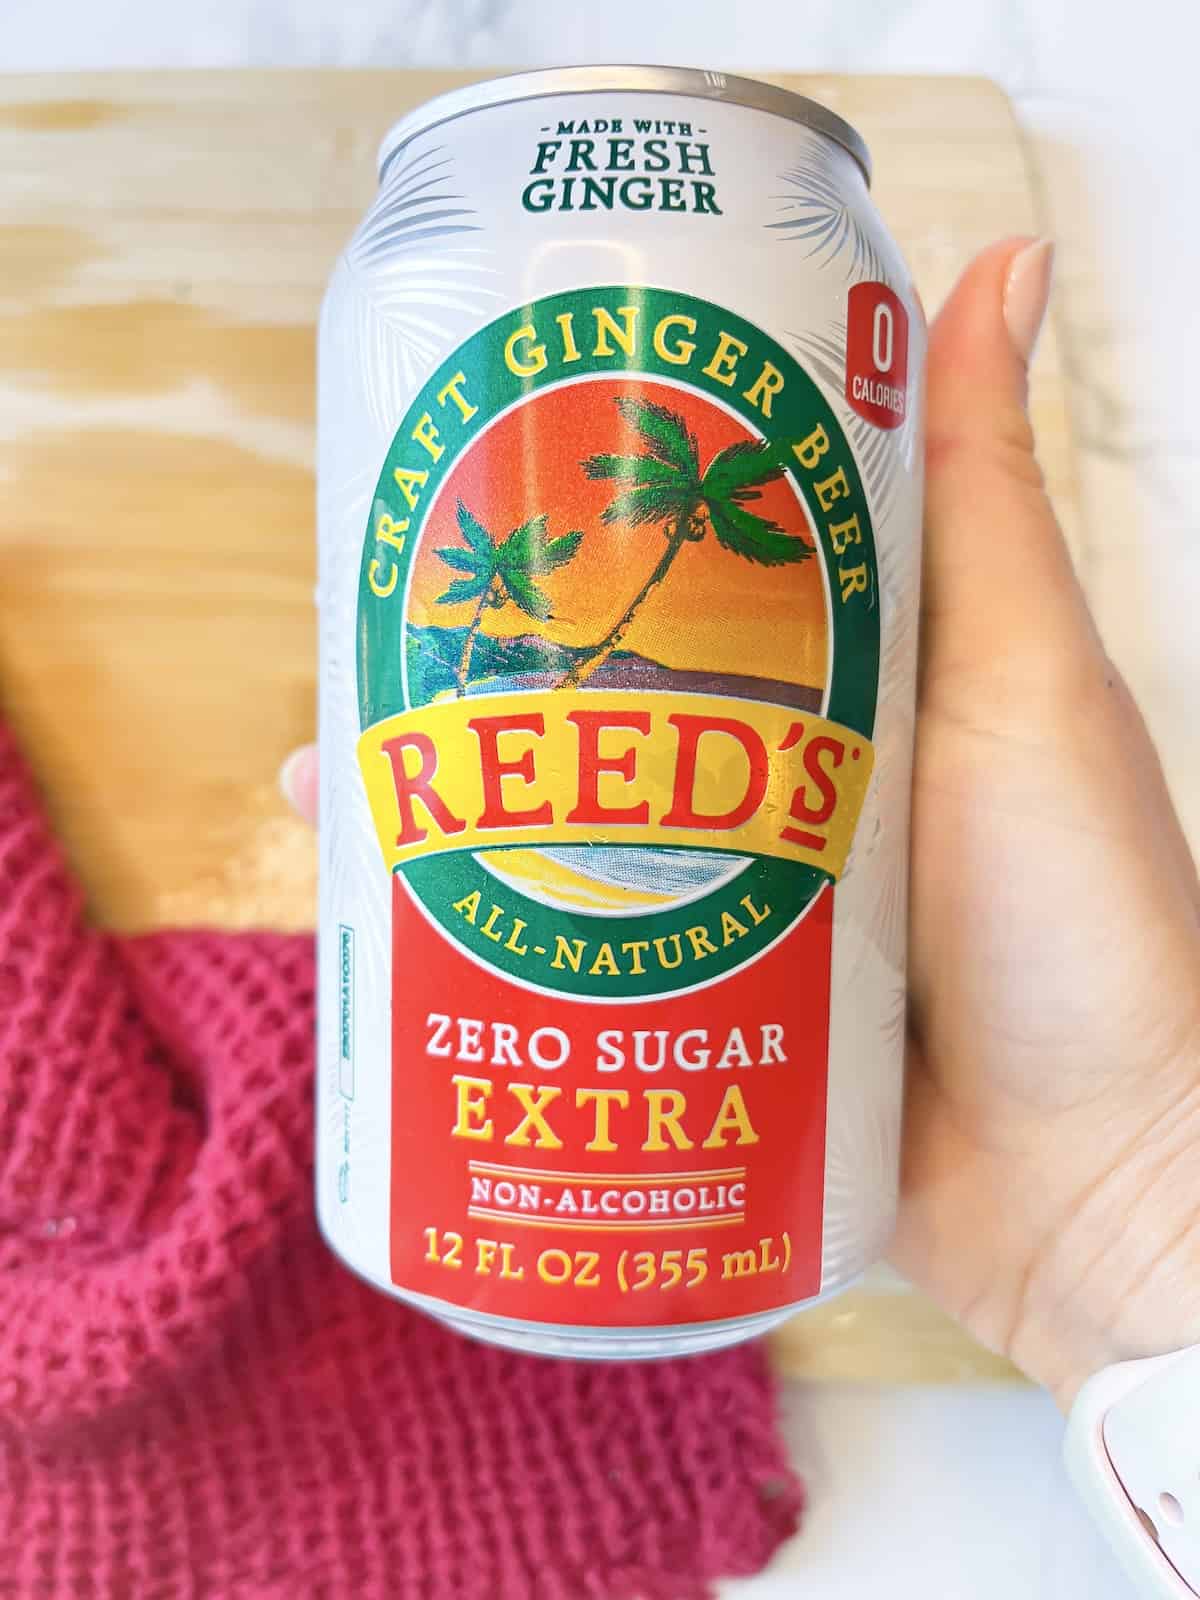 Reed's Zero Sugar extra ginger beer is a great option for no calorie ginger beer